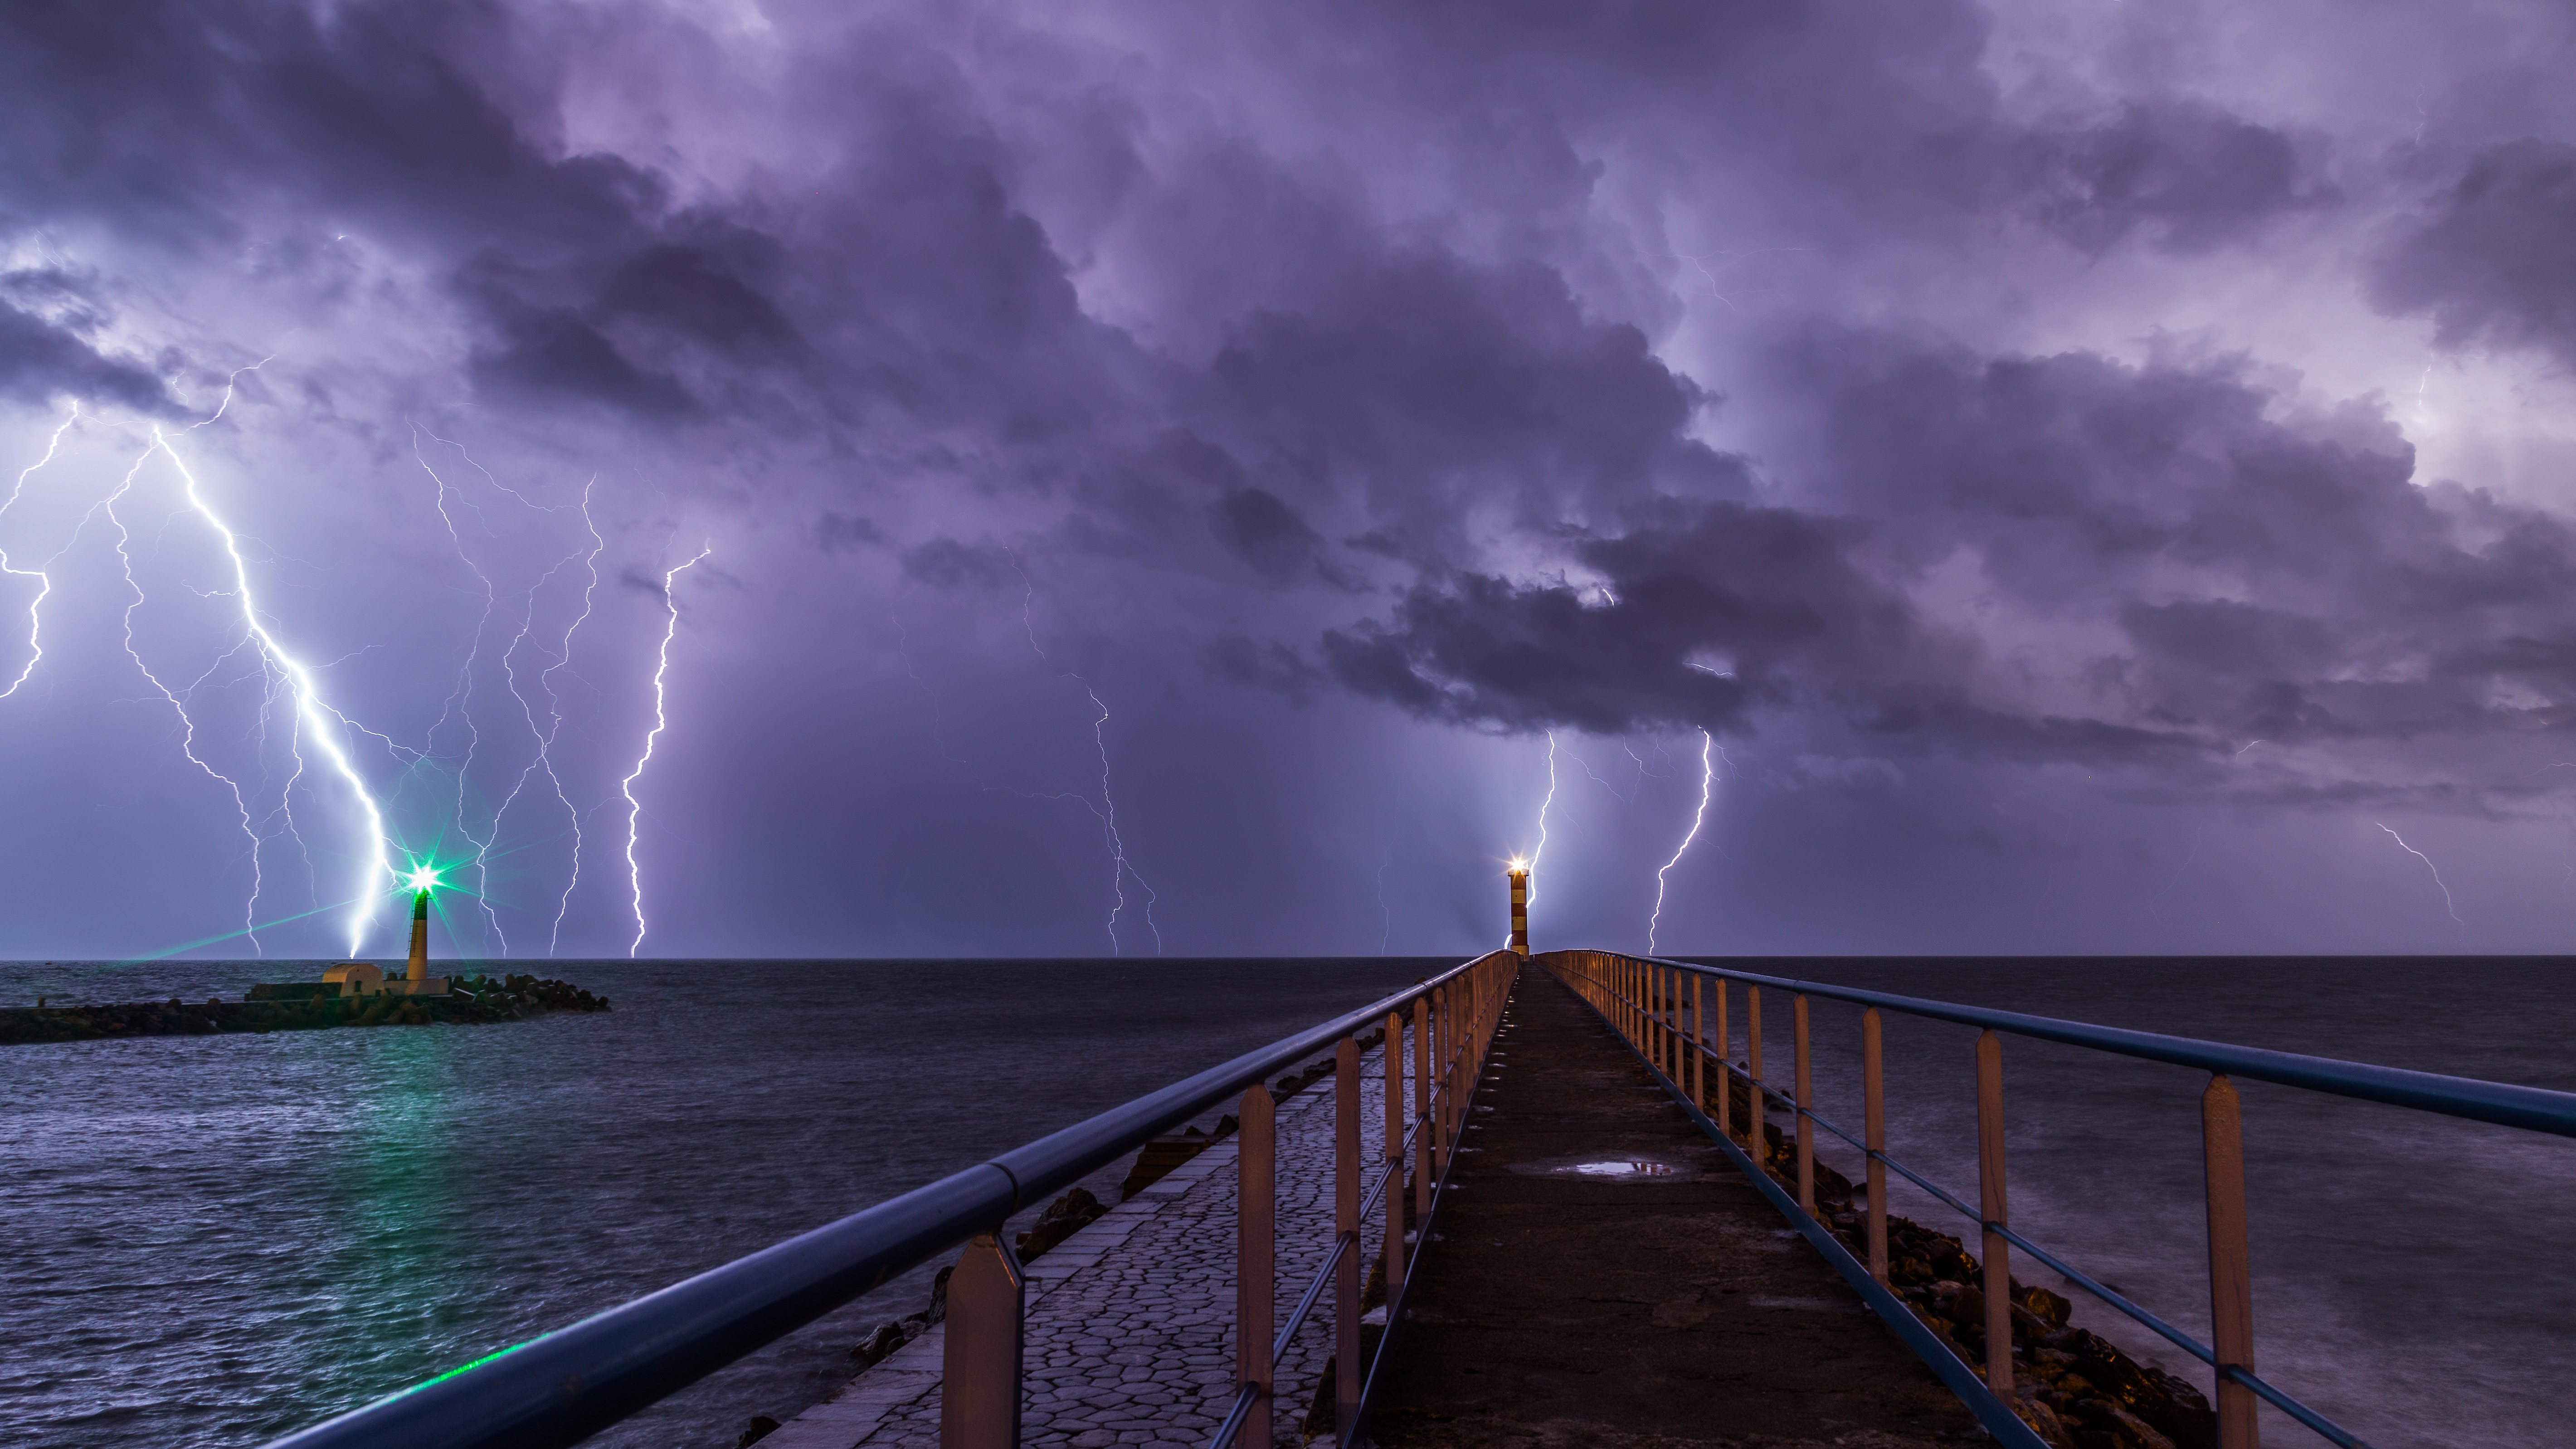 Amazing Storm Pictures & Backgrounds